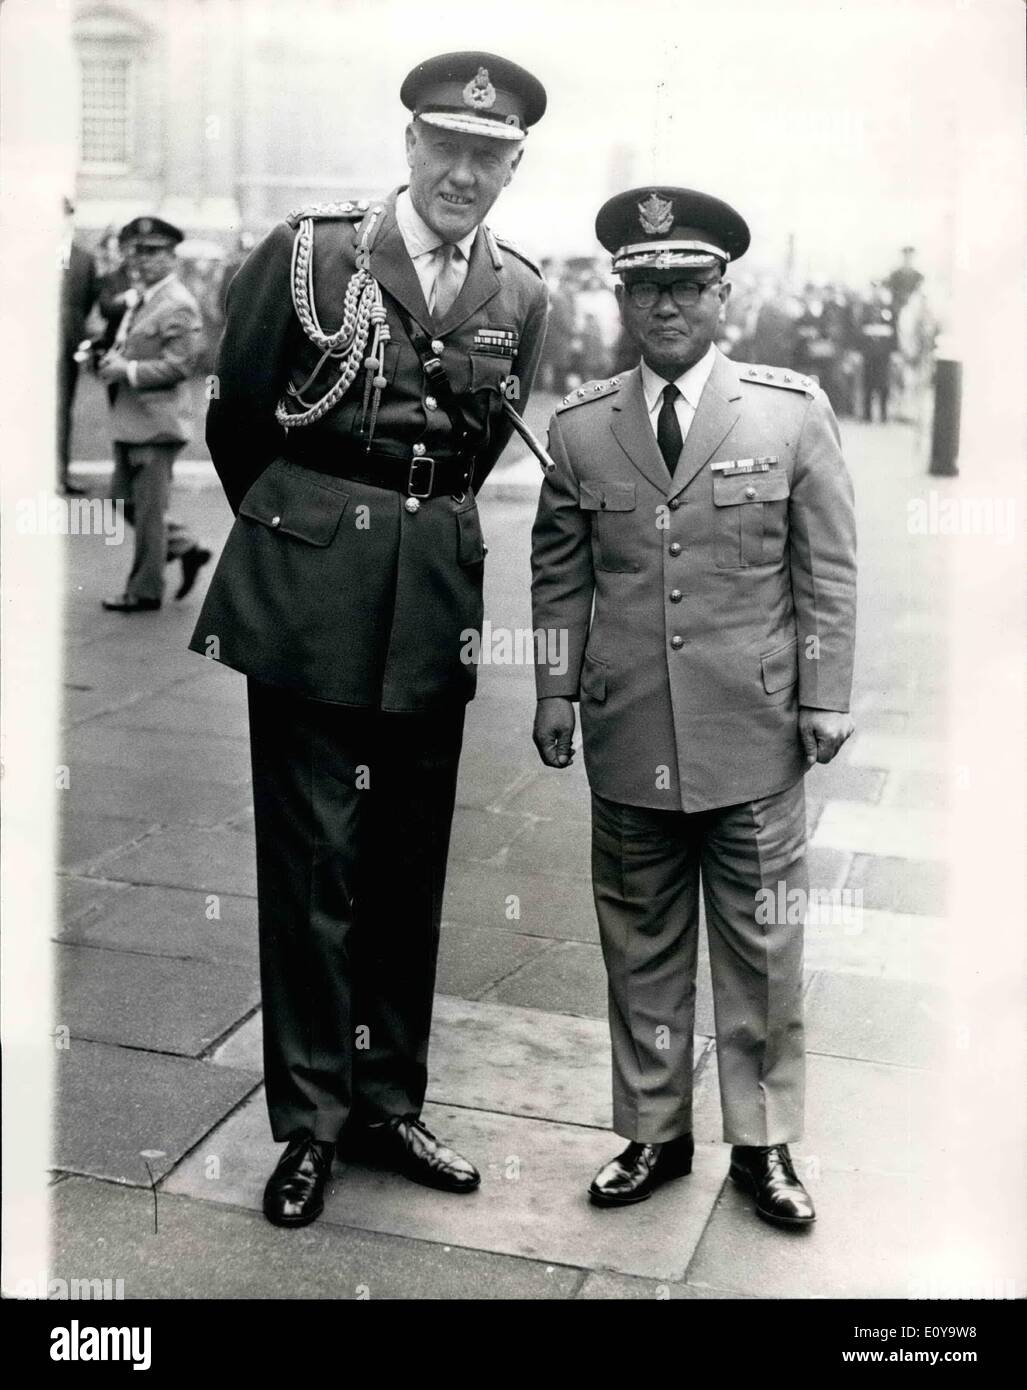 Sep. 09, 1969 - Japanese General in London: General Masao Yamada, Chief of Staff, Ground Self Defence Force, Japanese Defence Agency - this afternoon called at the Ministry of Defence, London. Photo shows General Masao Yamada is greeted by General Sir Geoffrey Baker, Chief of the General Staff, when he arrived at the Ministry of Defence today. Stock Photo